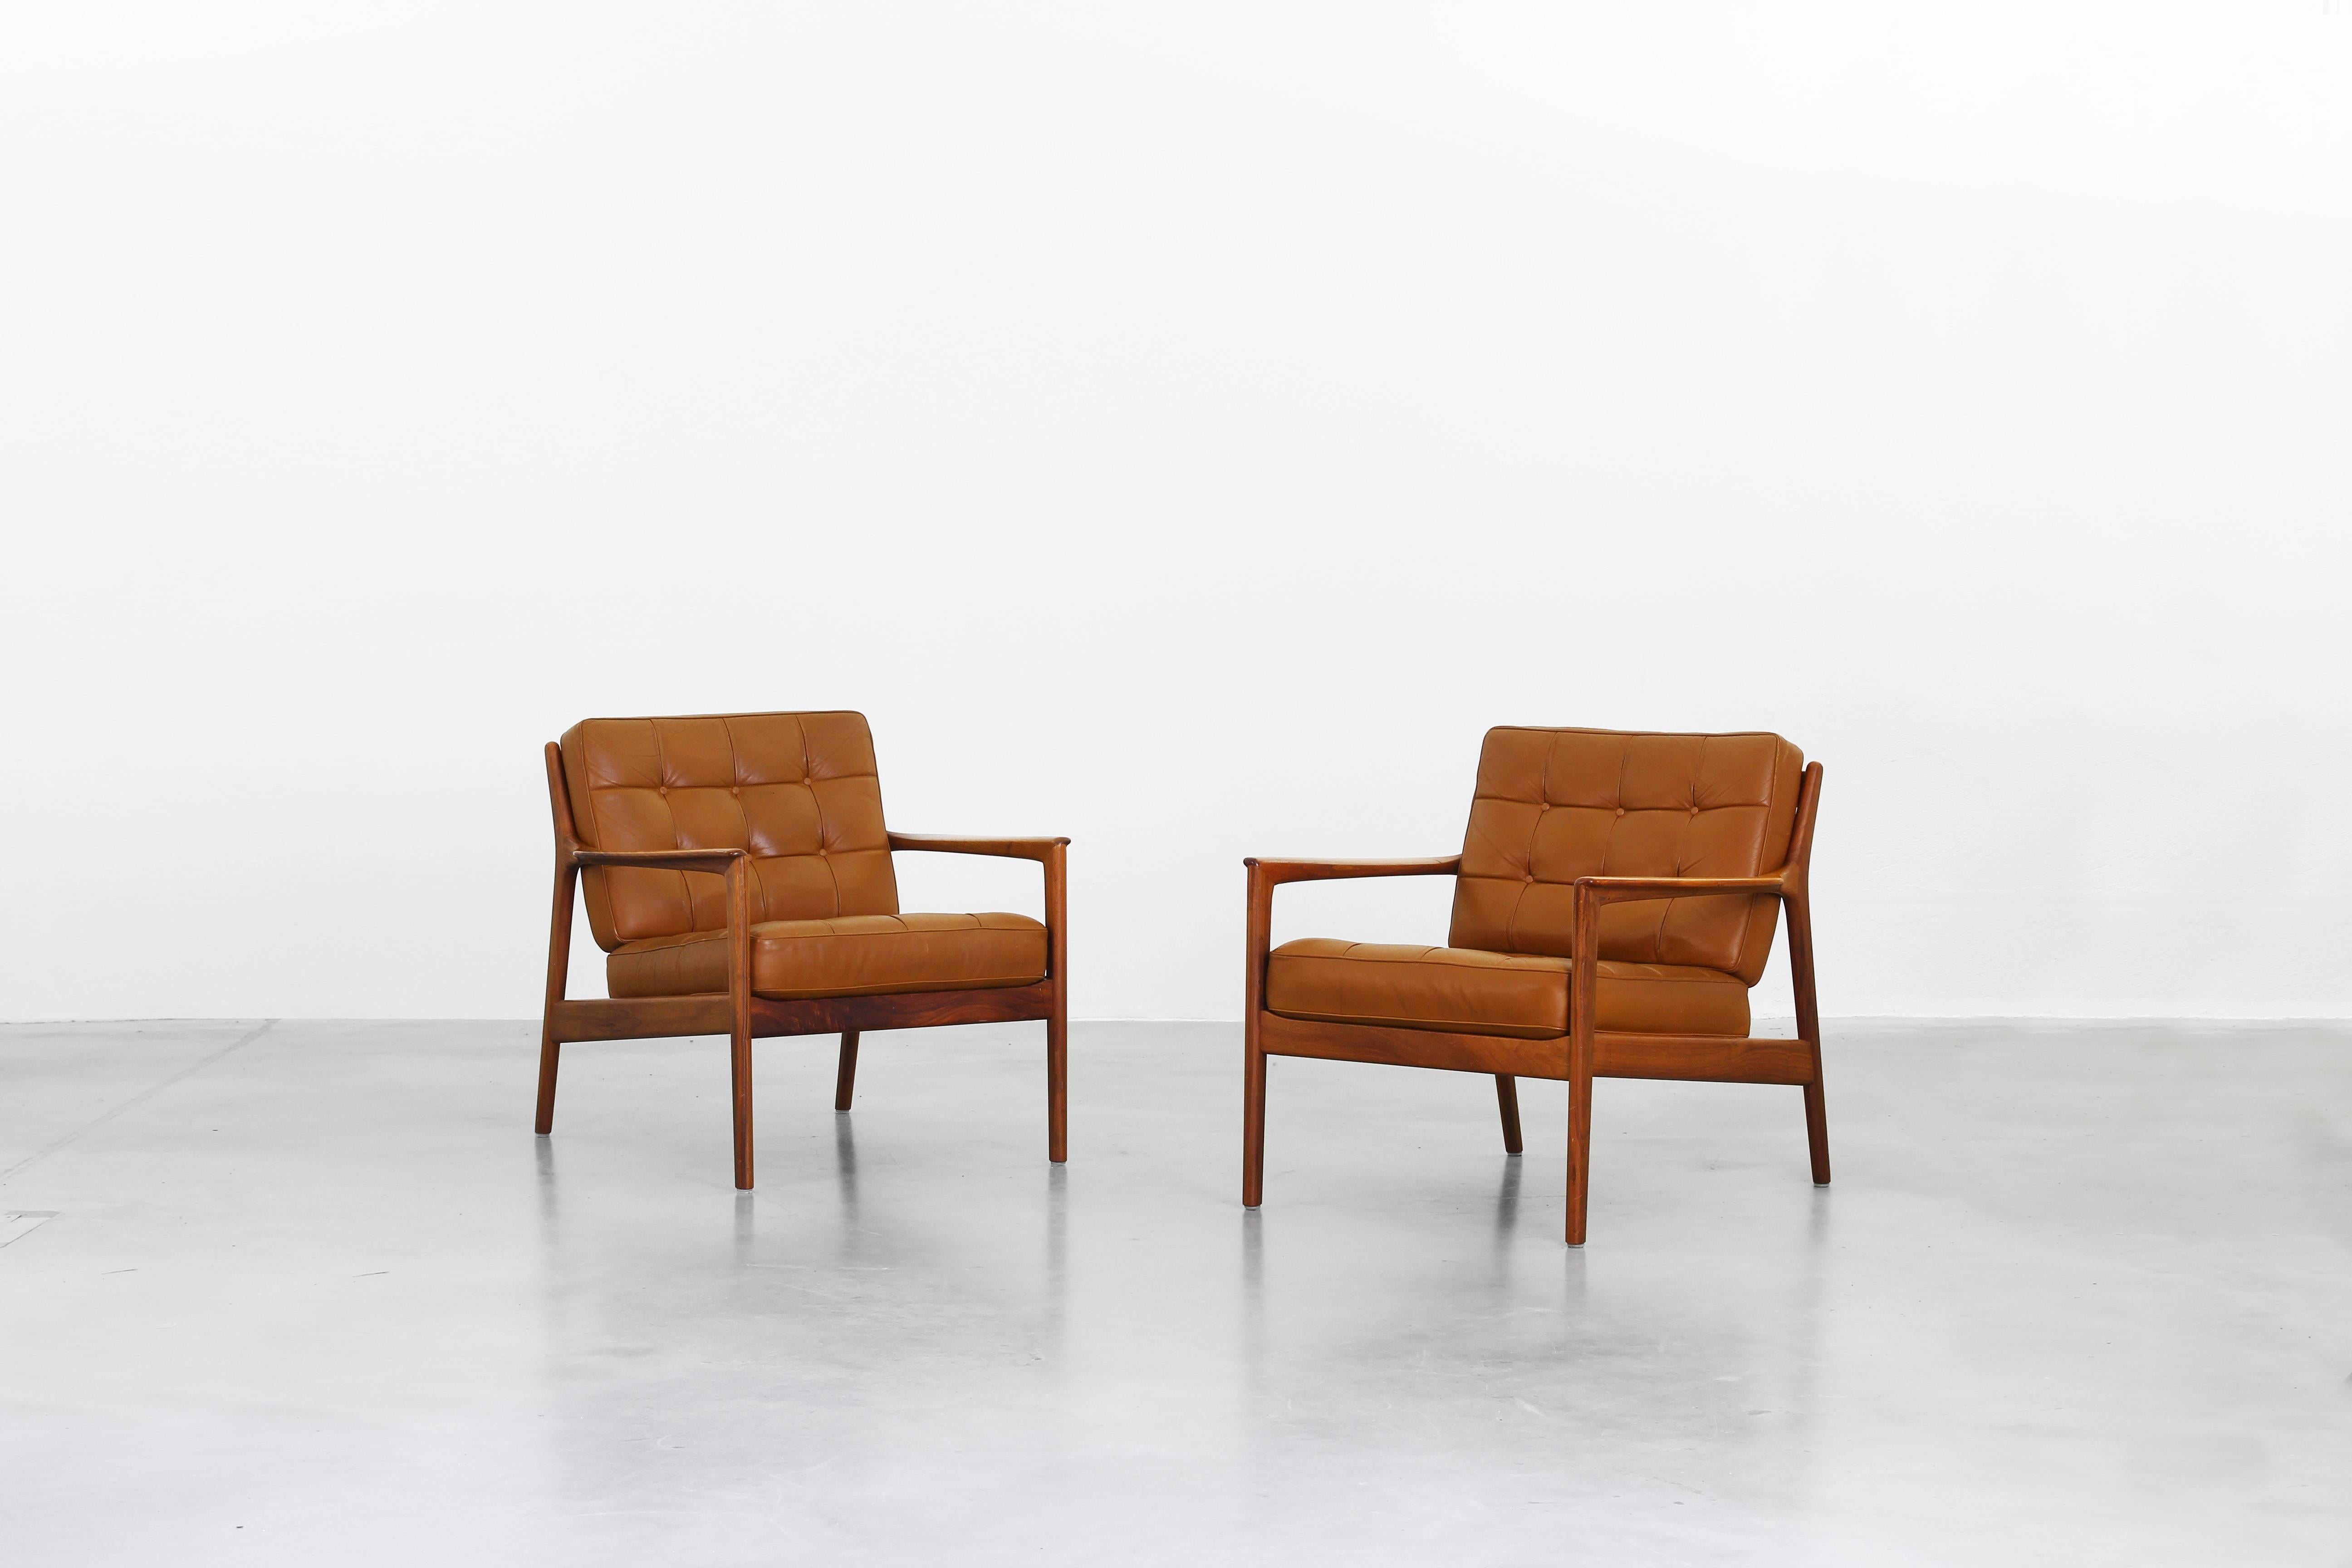 A beautiful pair of lounge chairs by Folke Ohlsson for DUX, designed in the 1960s and made in Sweden.
Both lounge chairs are in a very good condition with little signs of use without any cracks, breaks or damages.
We offer worldwide shipping.